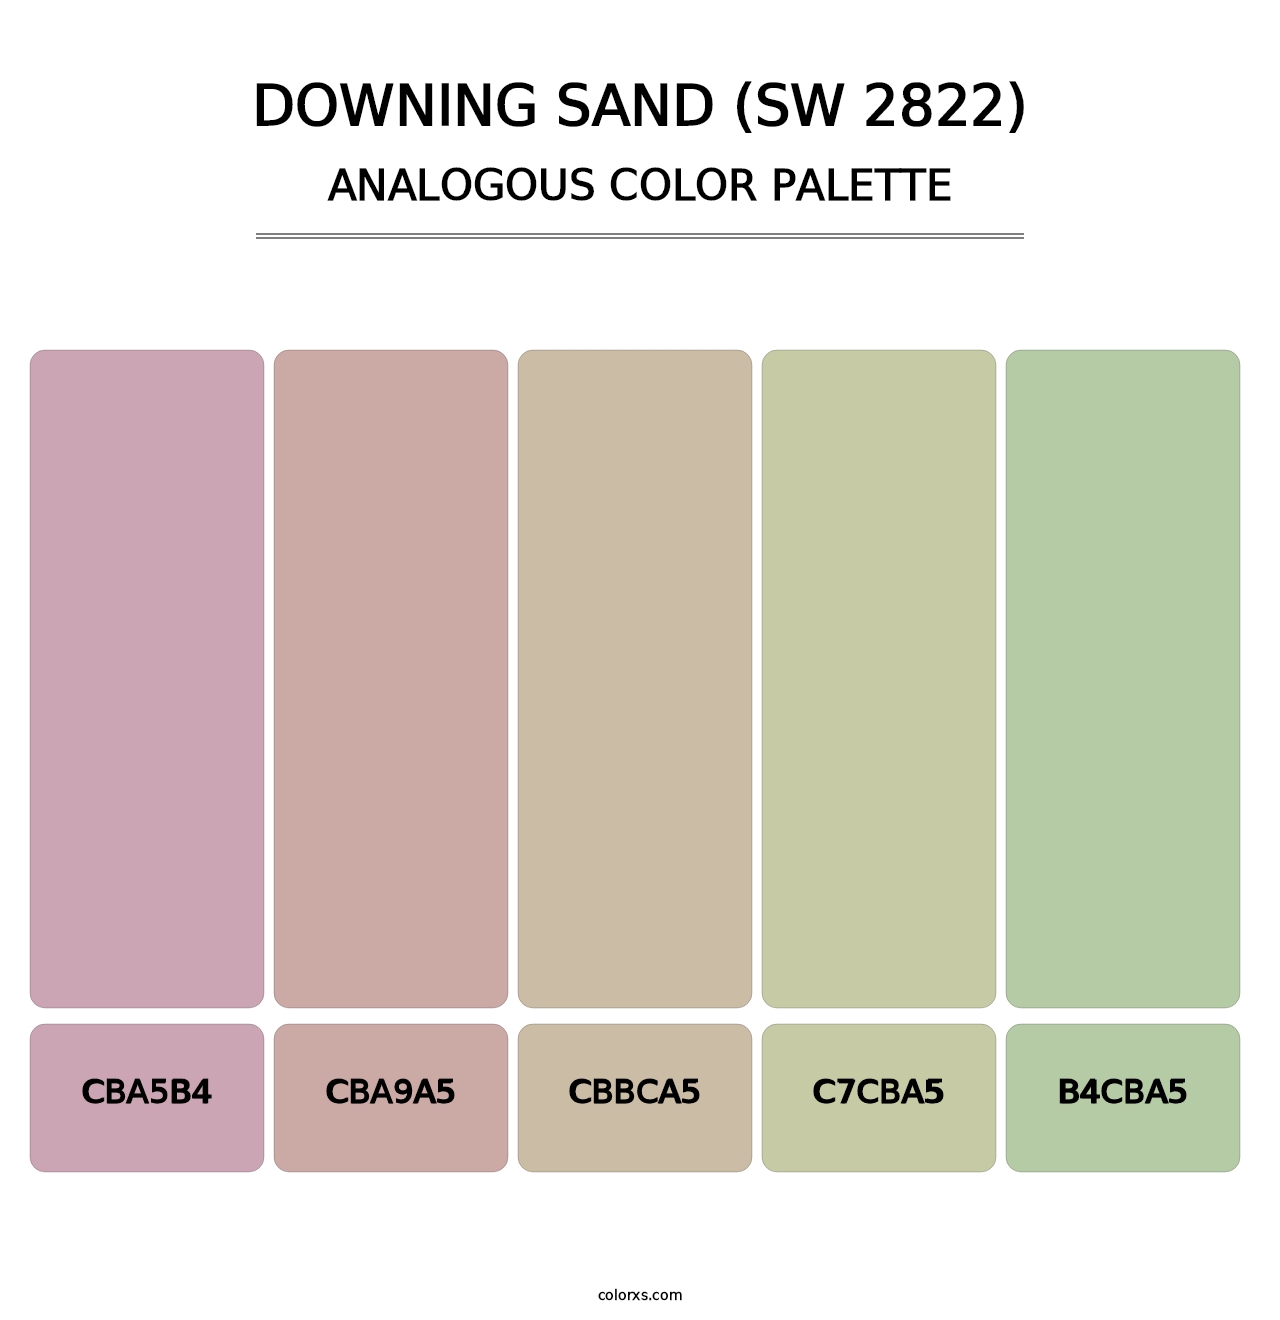 Downing Sand (SW 2822) - Analogous Color Palette